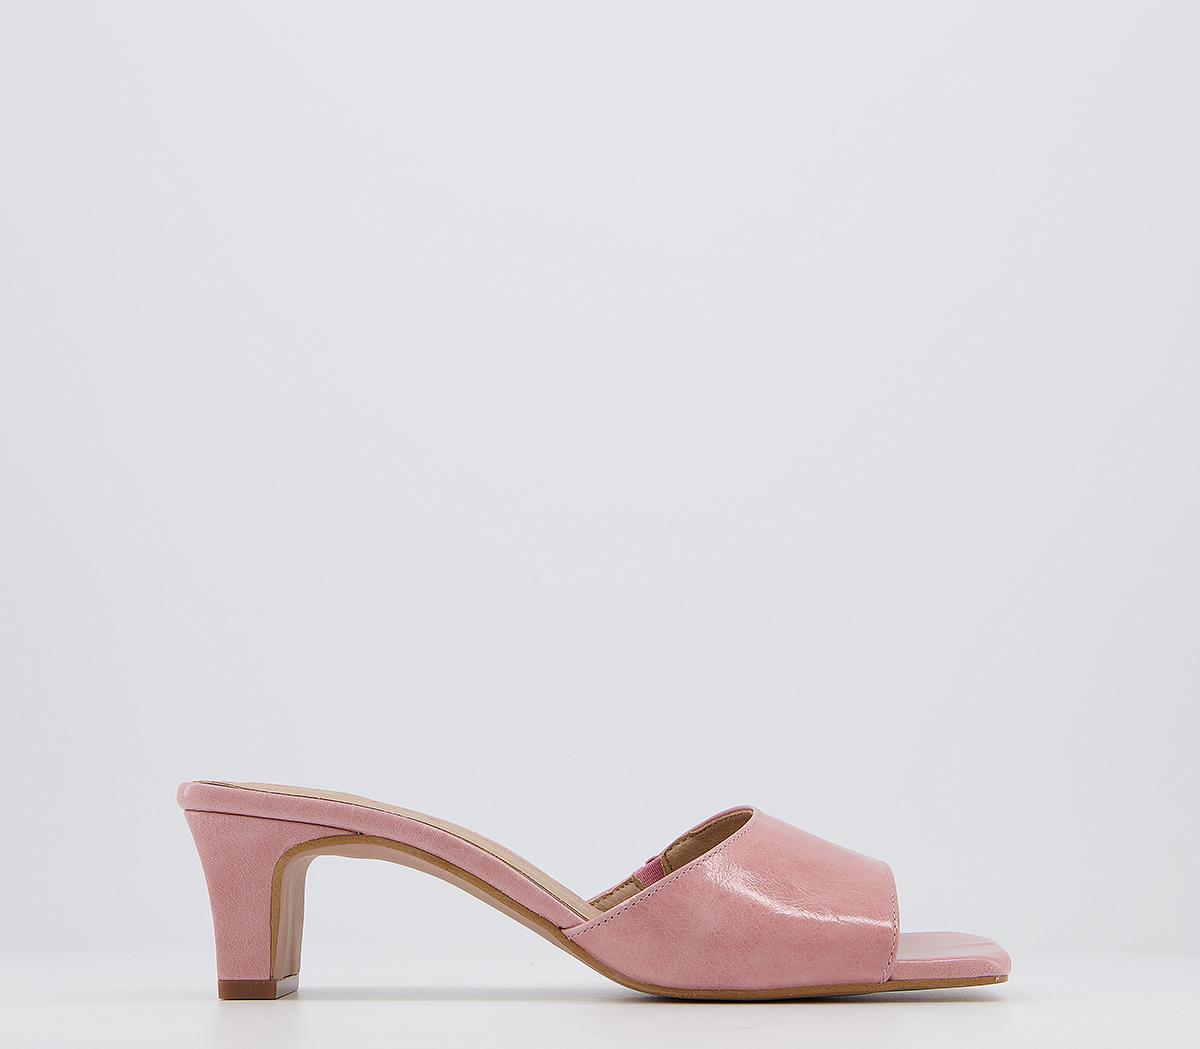 OFFICEMagna Low Heel MulesPink Leather